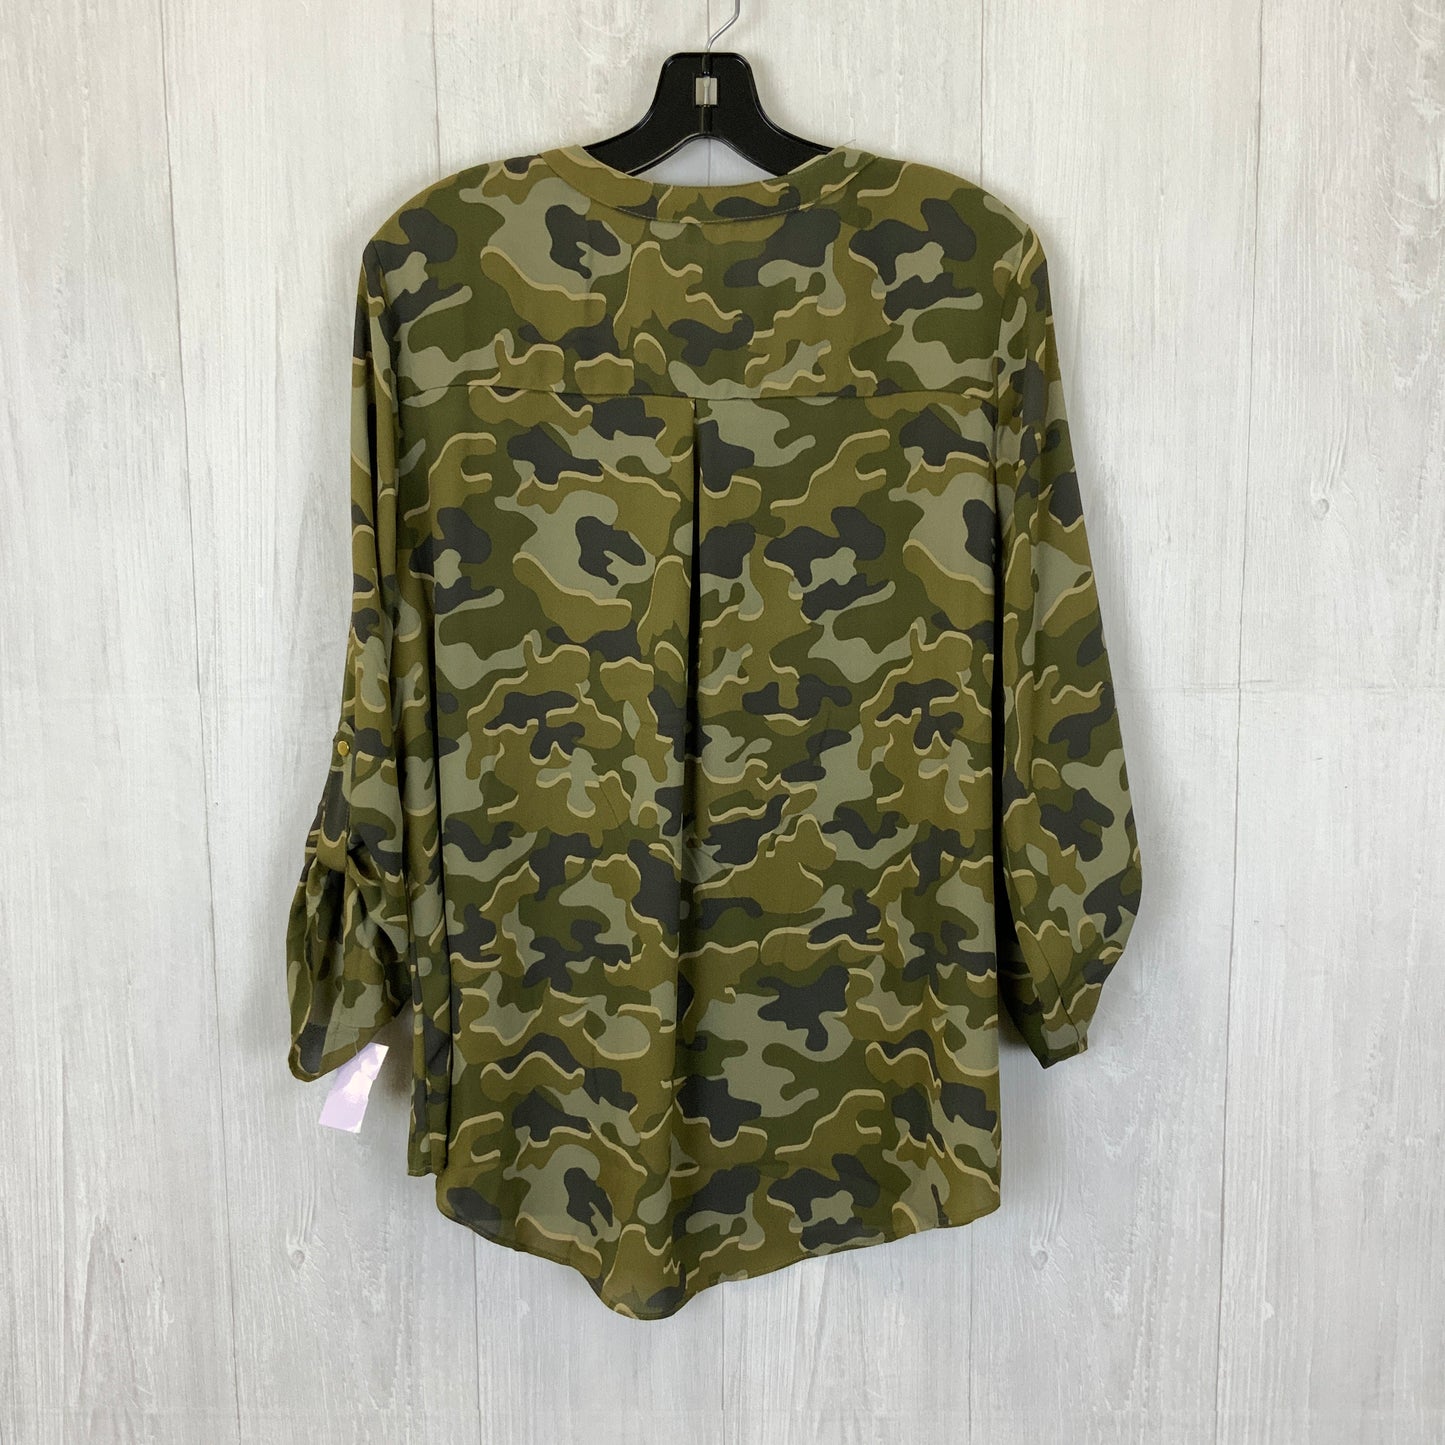 Camouflage Print Top Long Sleeve Cato, Size L